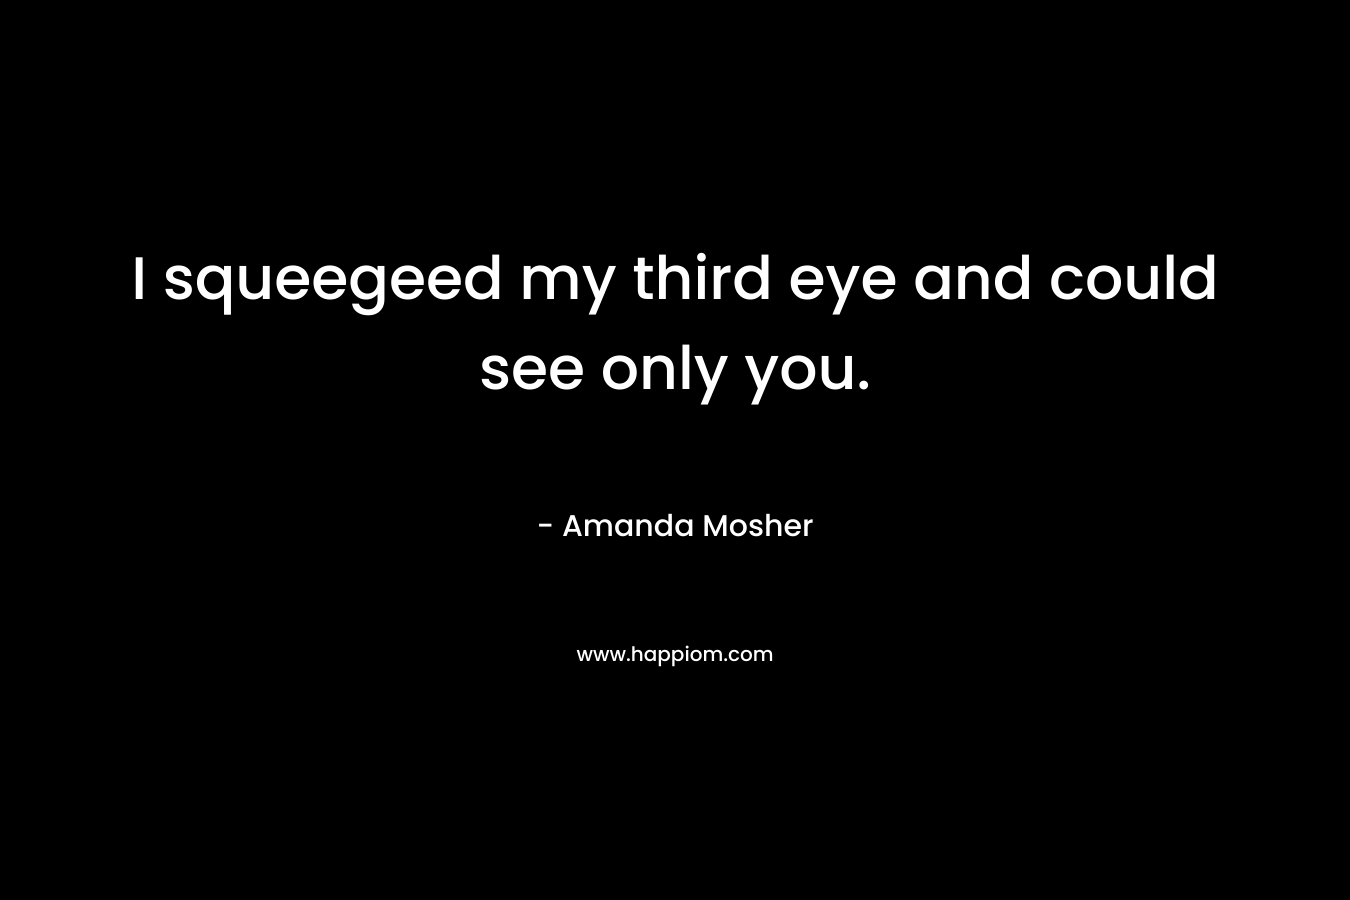 I squeegeed my third eye and could see only you. – Amanda Mosher